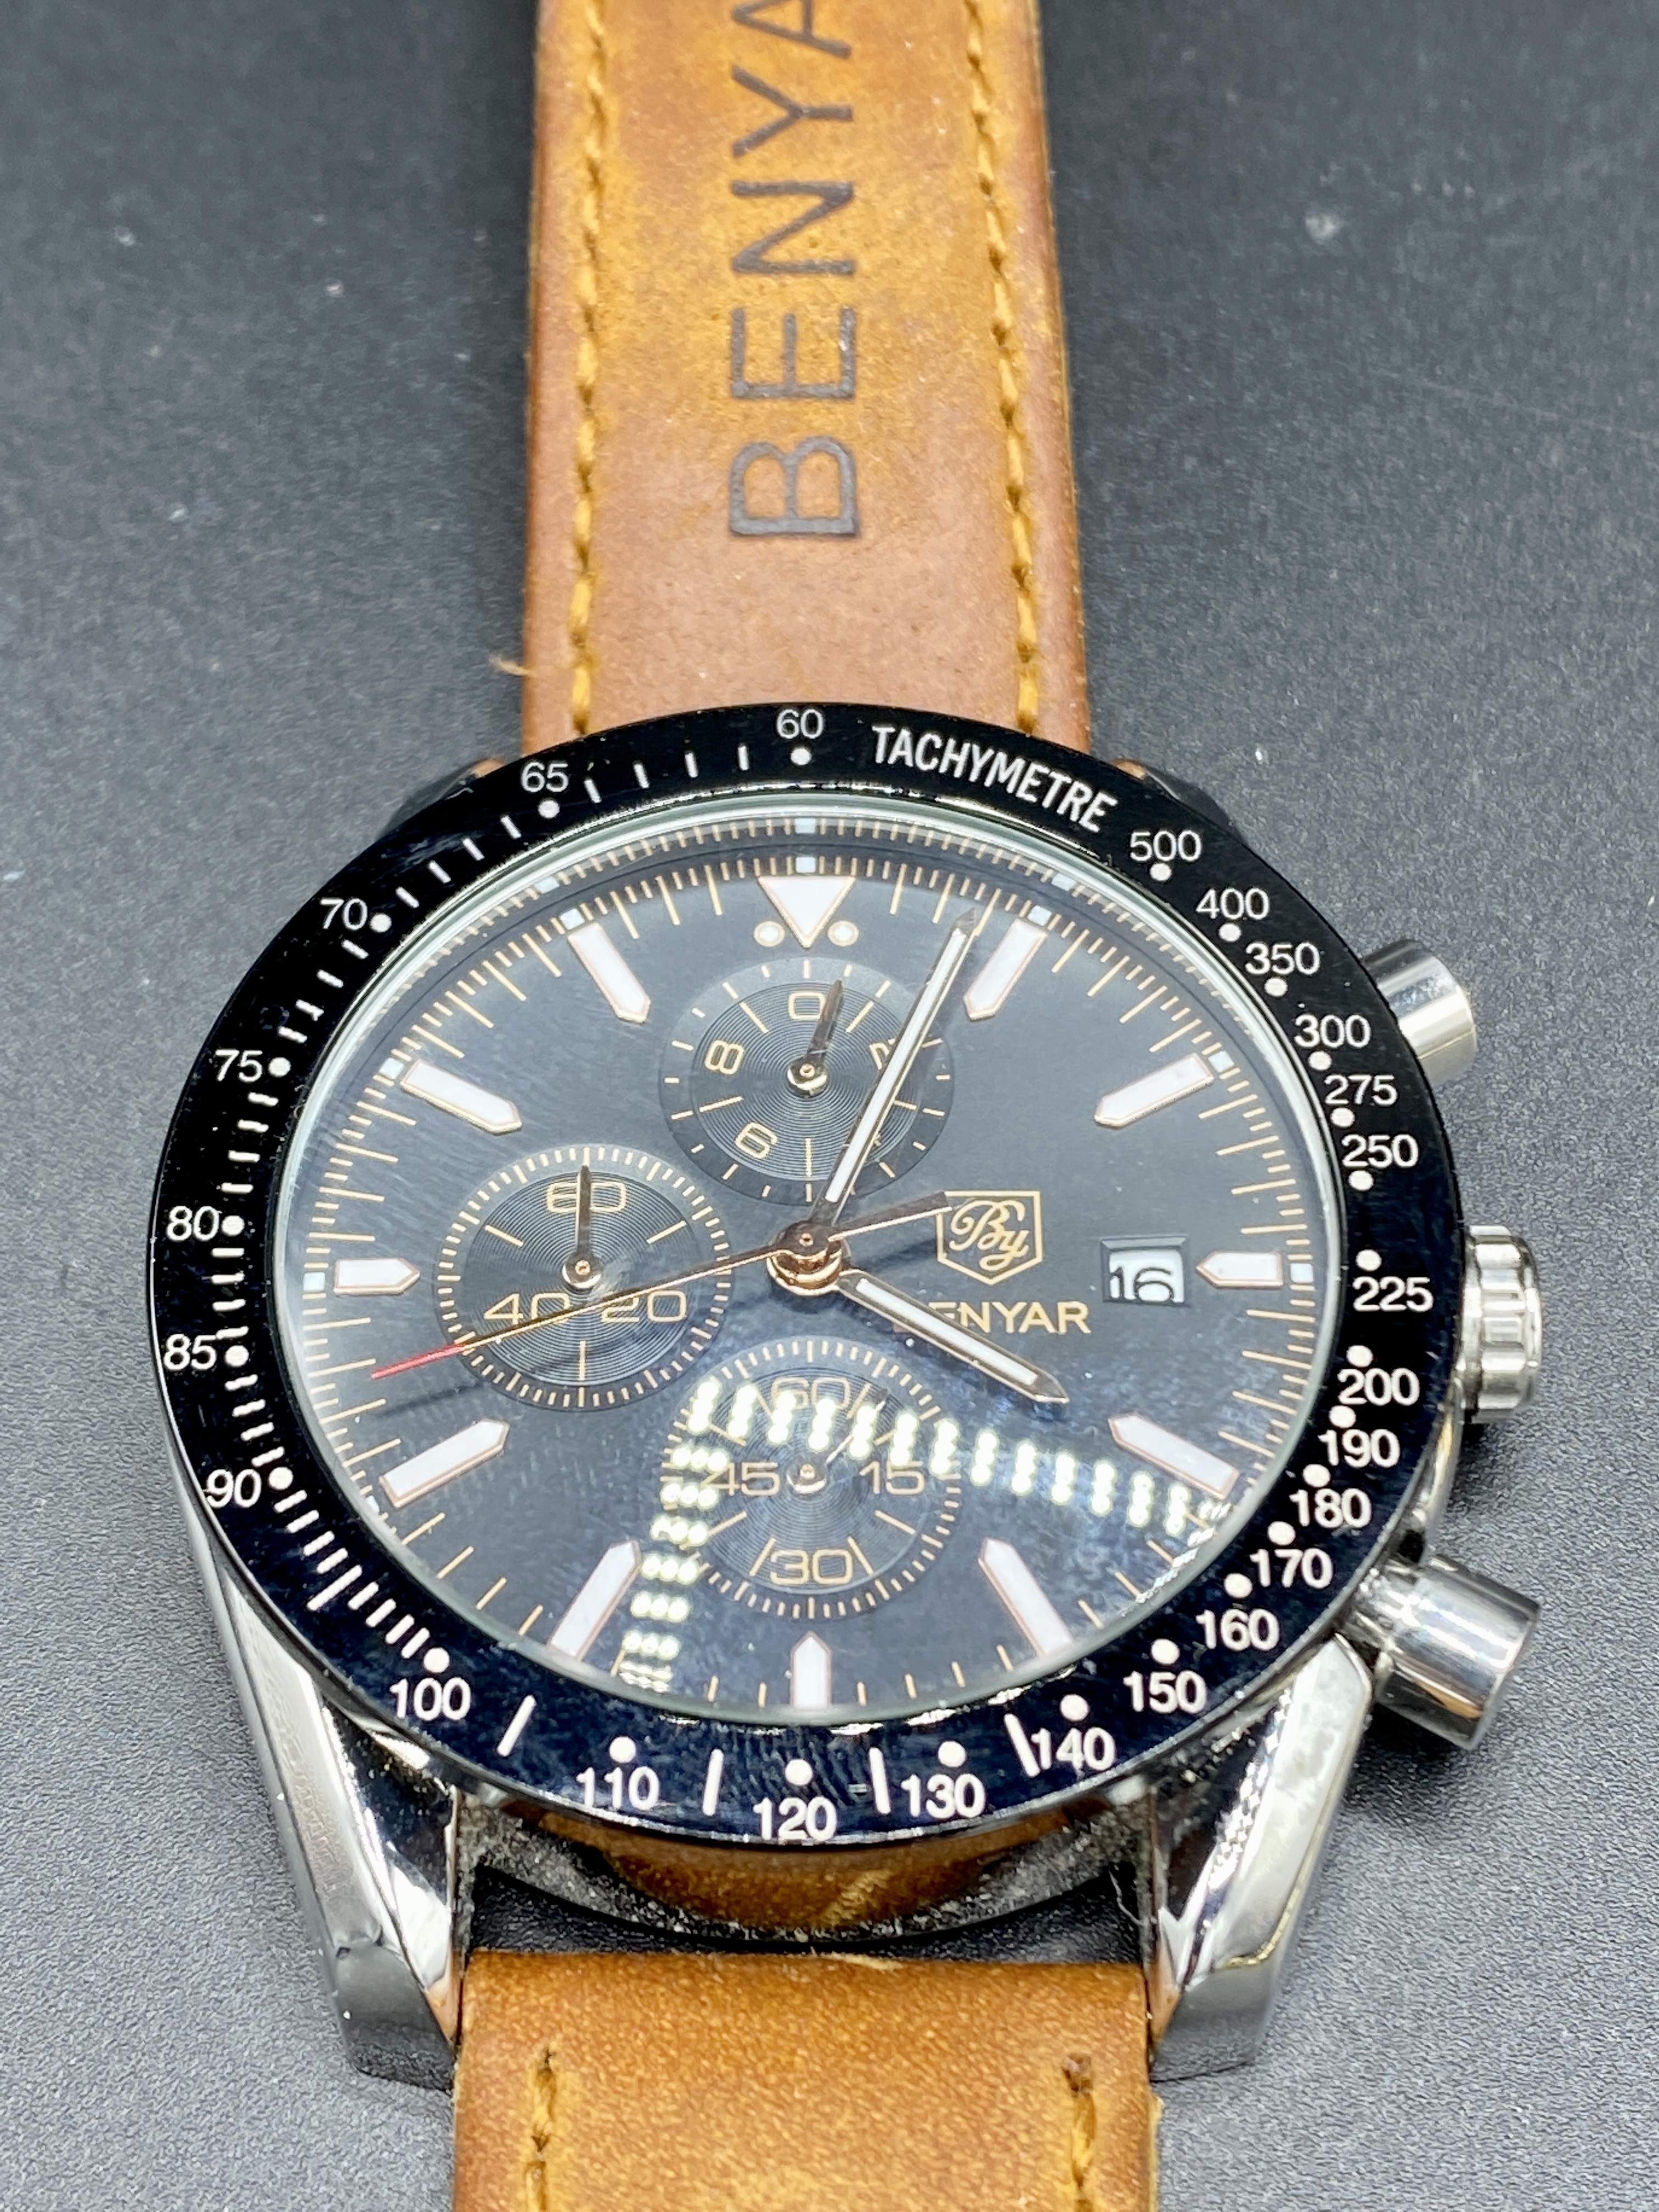 Seiko automatic gent's wrist watch with day and date aperture, with 5 other wrist watches - Image 3 of 7